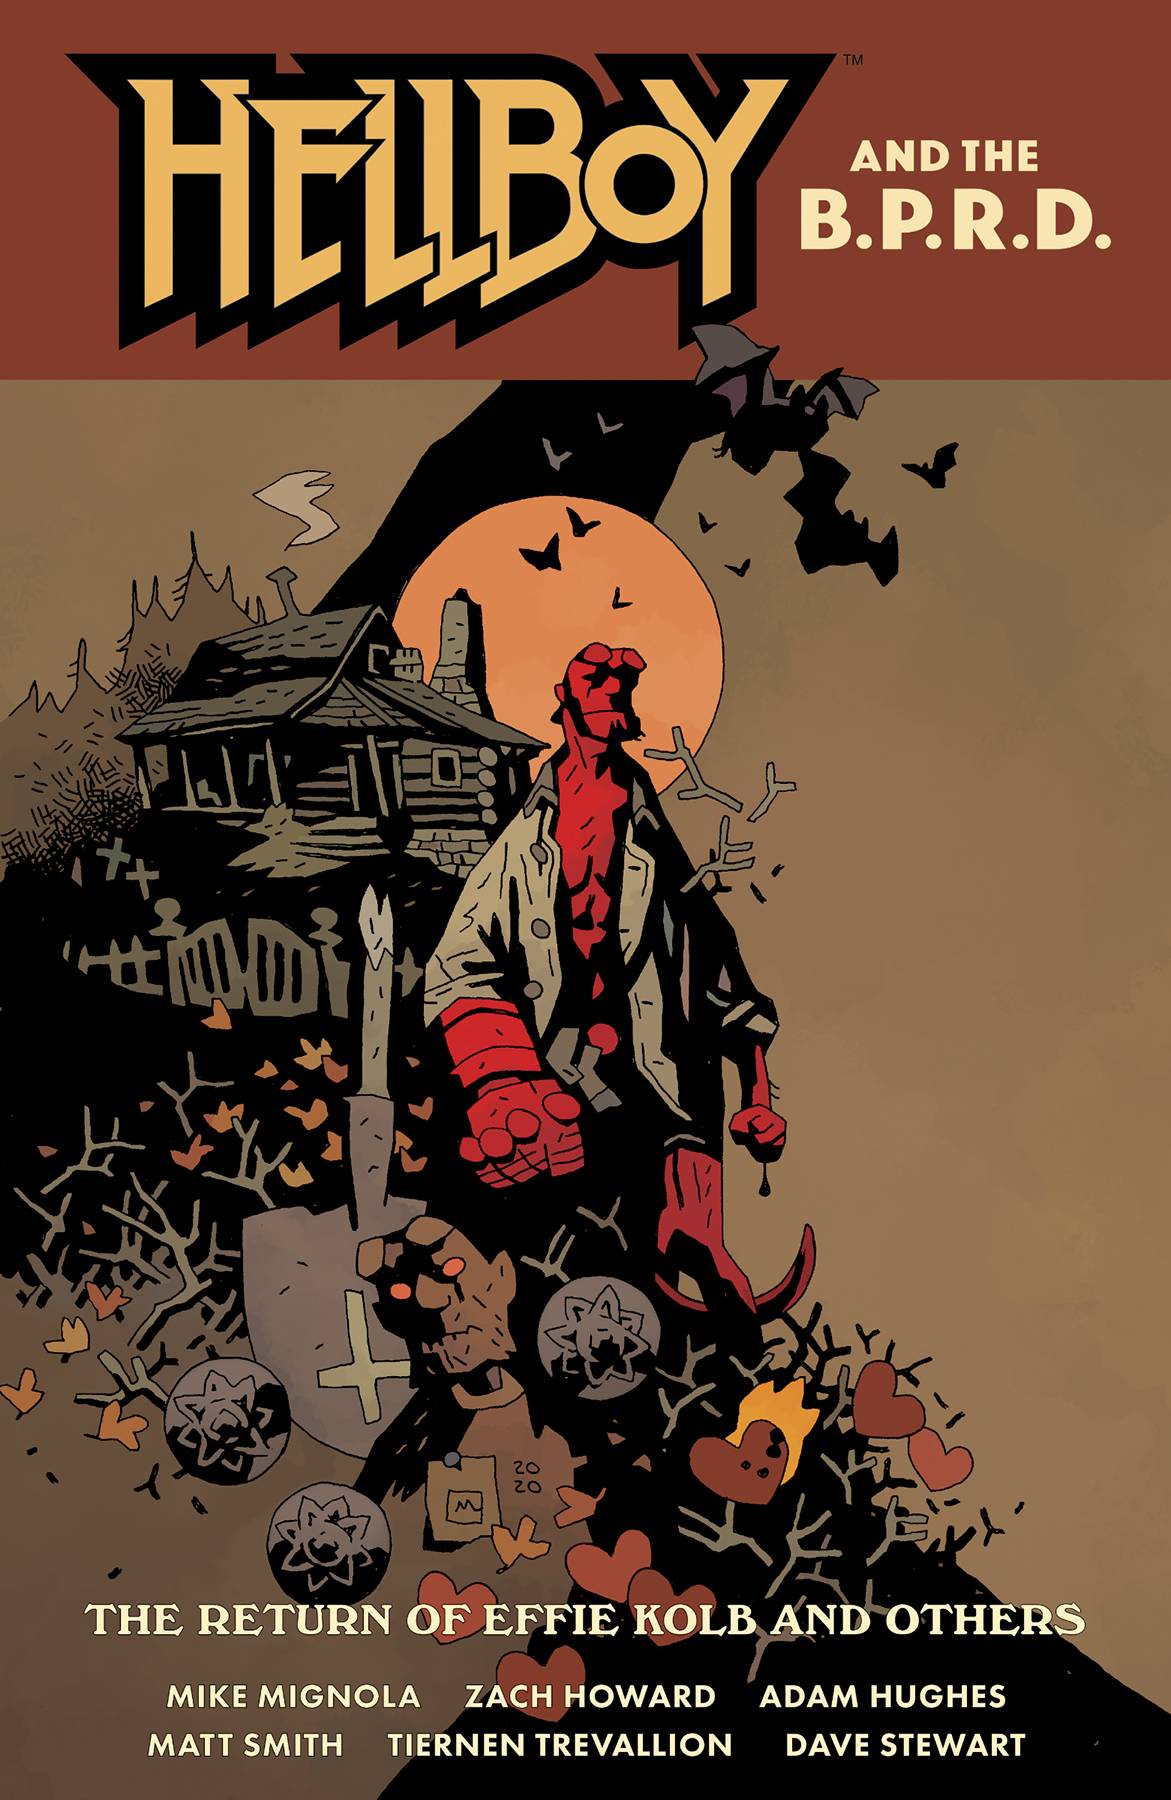 Hellboy and the B.P.R.D.: Return of Effie Kolb and Others TP